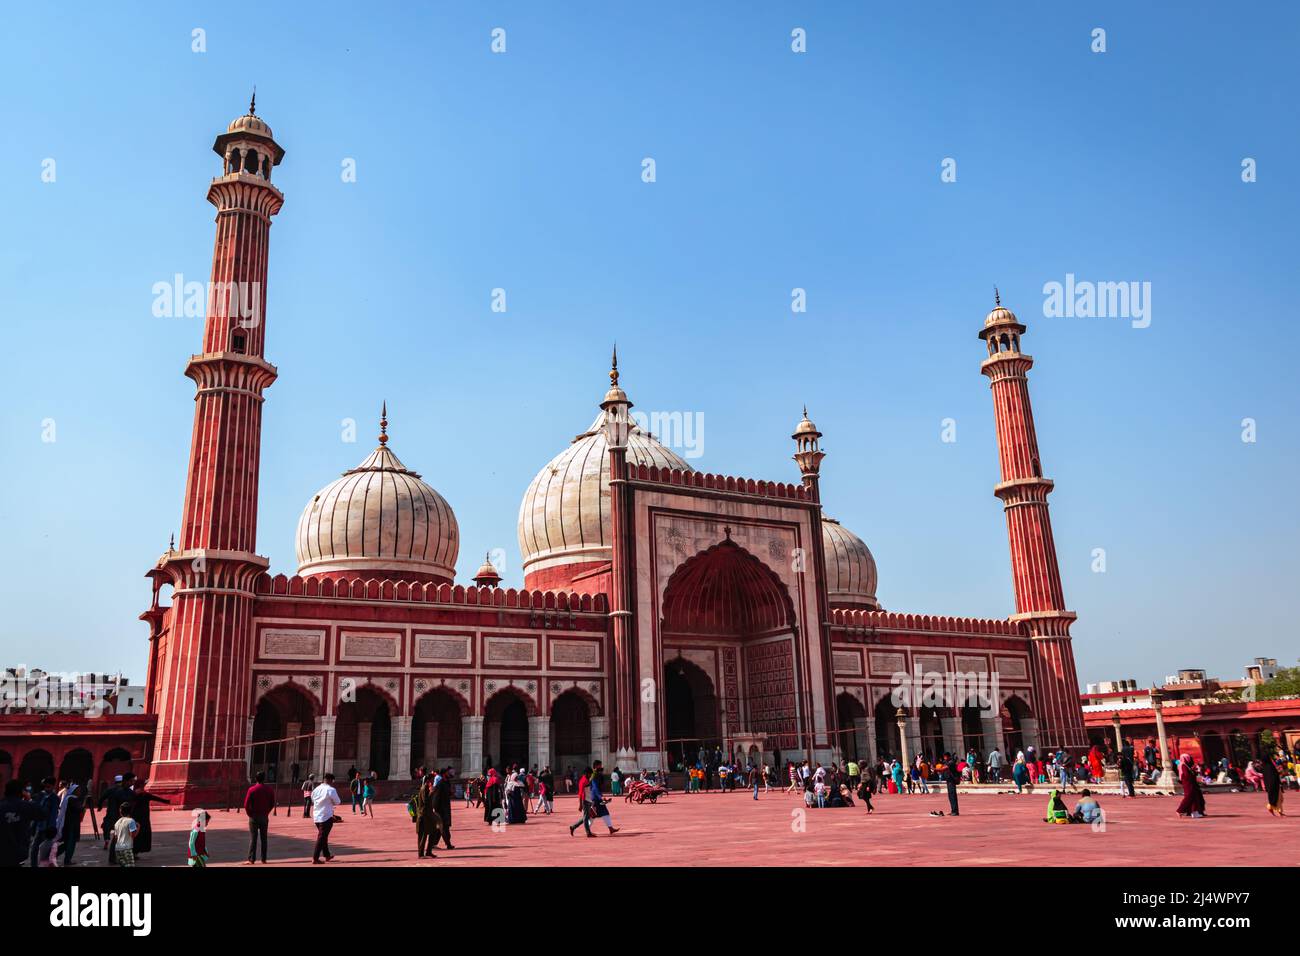 ancient mosque with people and bright blue sky at morning from unique perspective image is taken at jama masjid delhi india on Mar 30 2022. Stock Photo